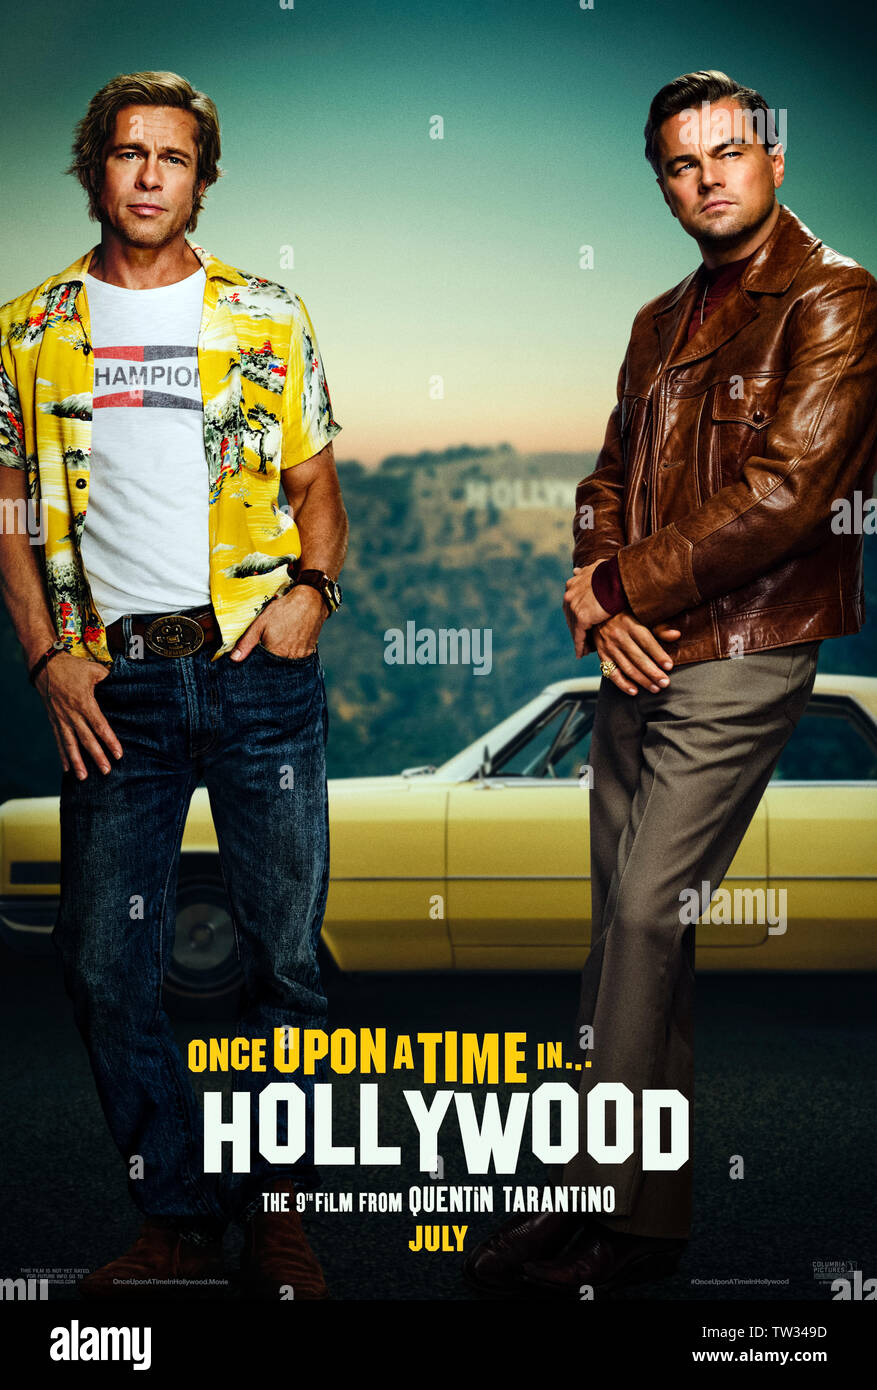 Once Upon a Time ... in Hollywood (2019) directed and written by Quentin Tarantino and starring Leonardo DiCaprio, Brad Pitt and Margot Robbie. Tarintino’s 9th film set in 1969 Los Angeles as Hollywood’s Golden Age draws to an end. Stock Photo